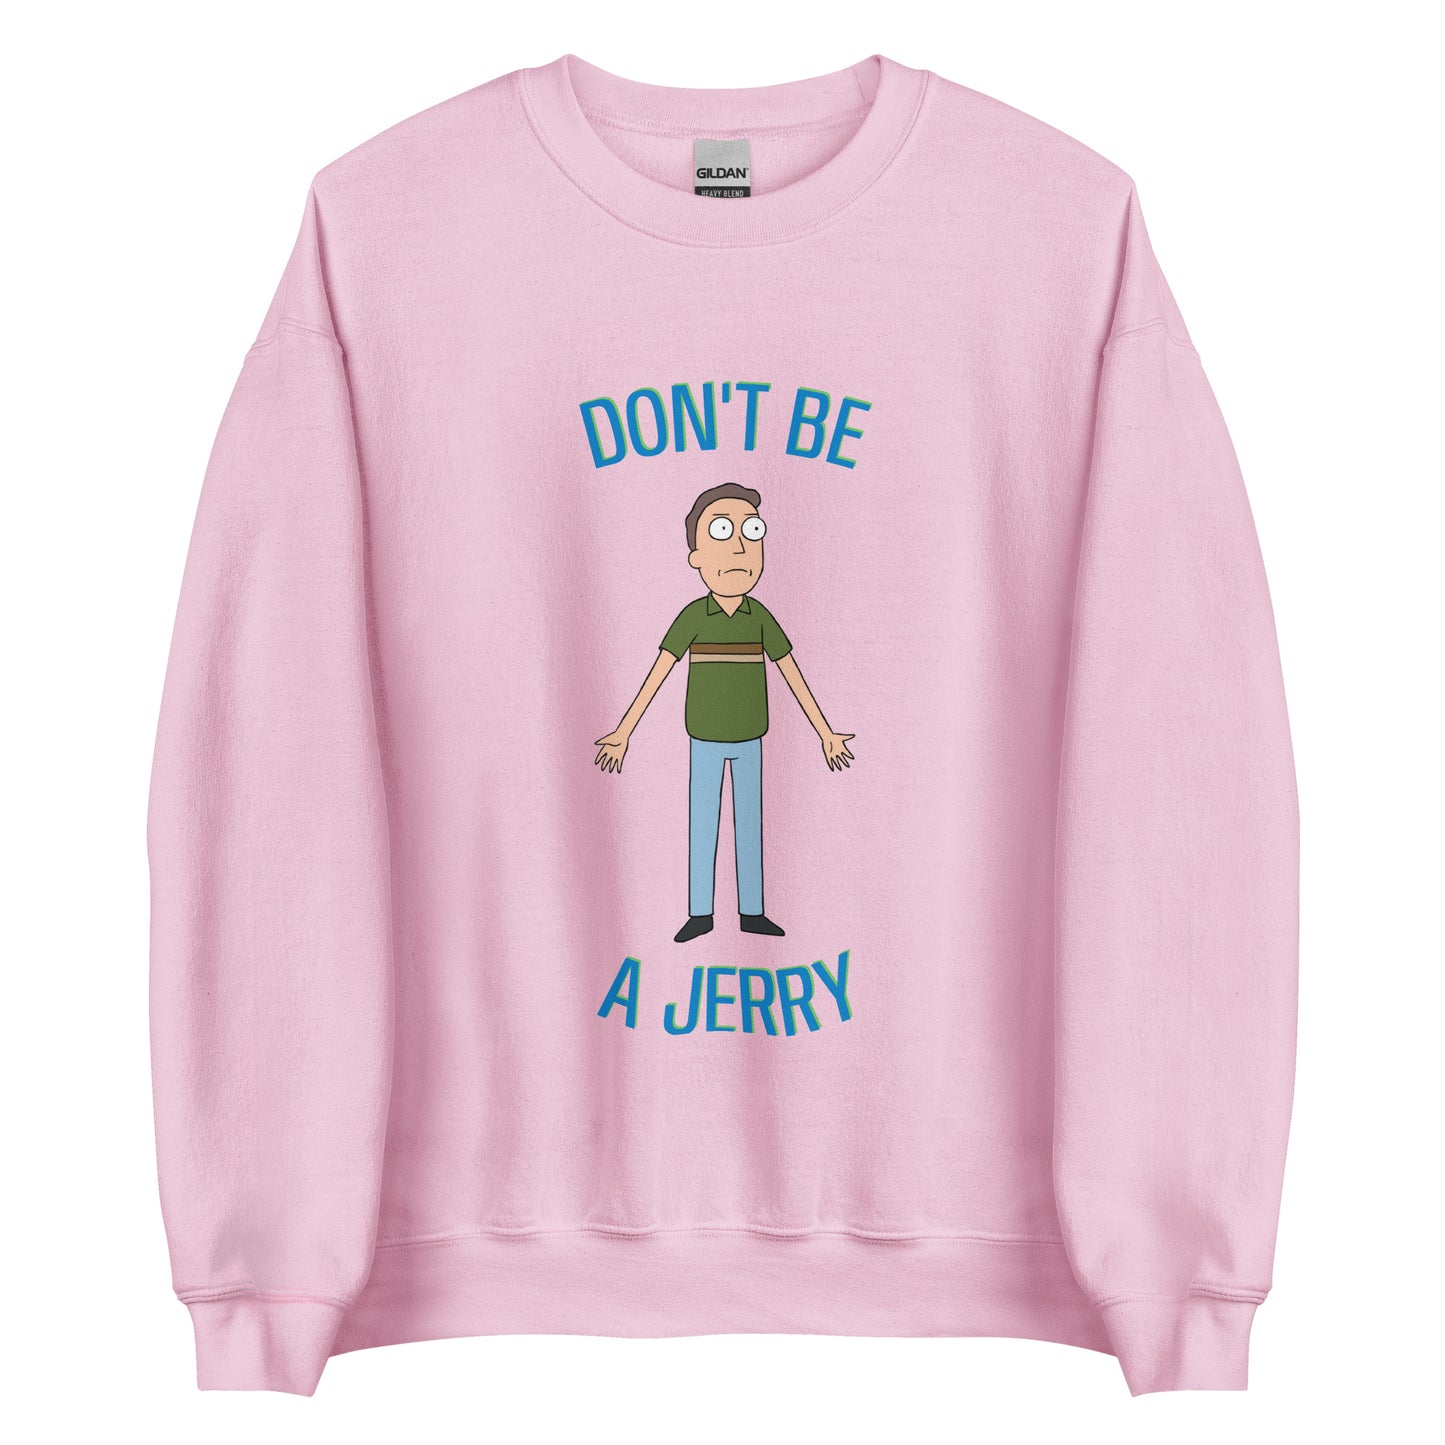 Sweatshirt Don't Be a Jerry